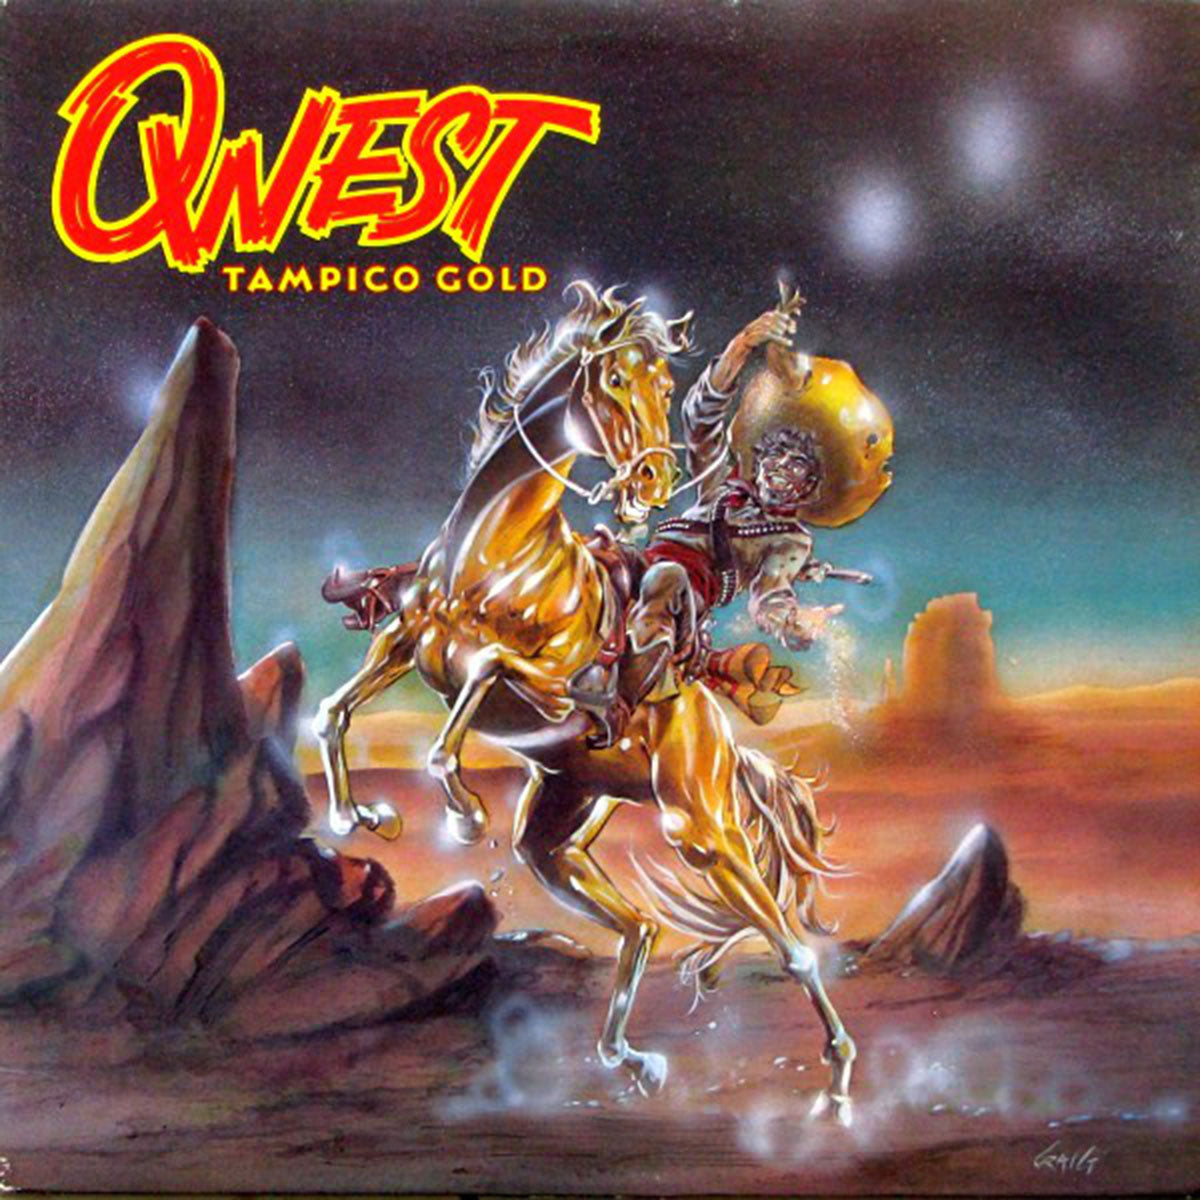 Qwest – Tampico Gold